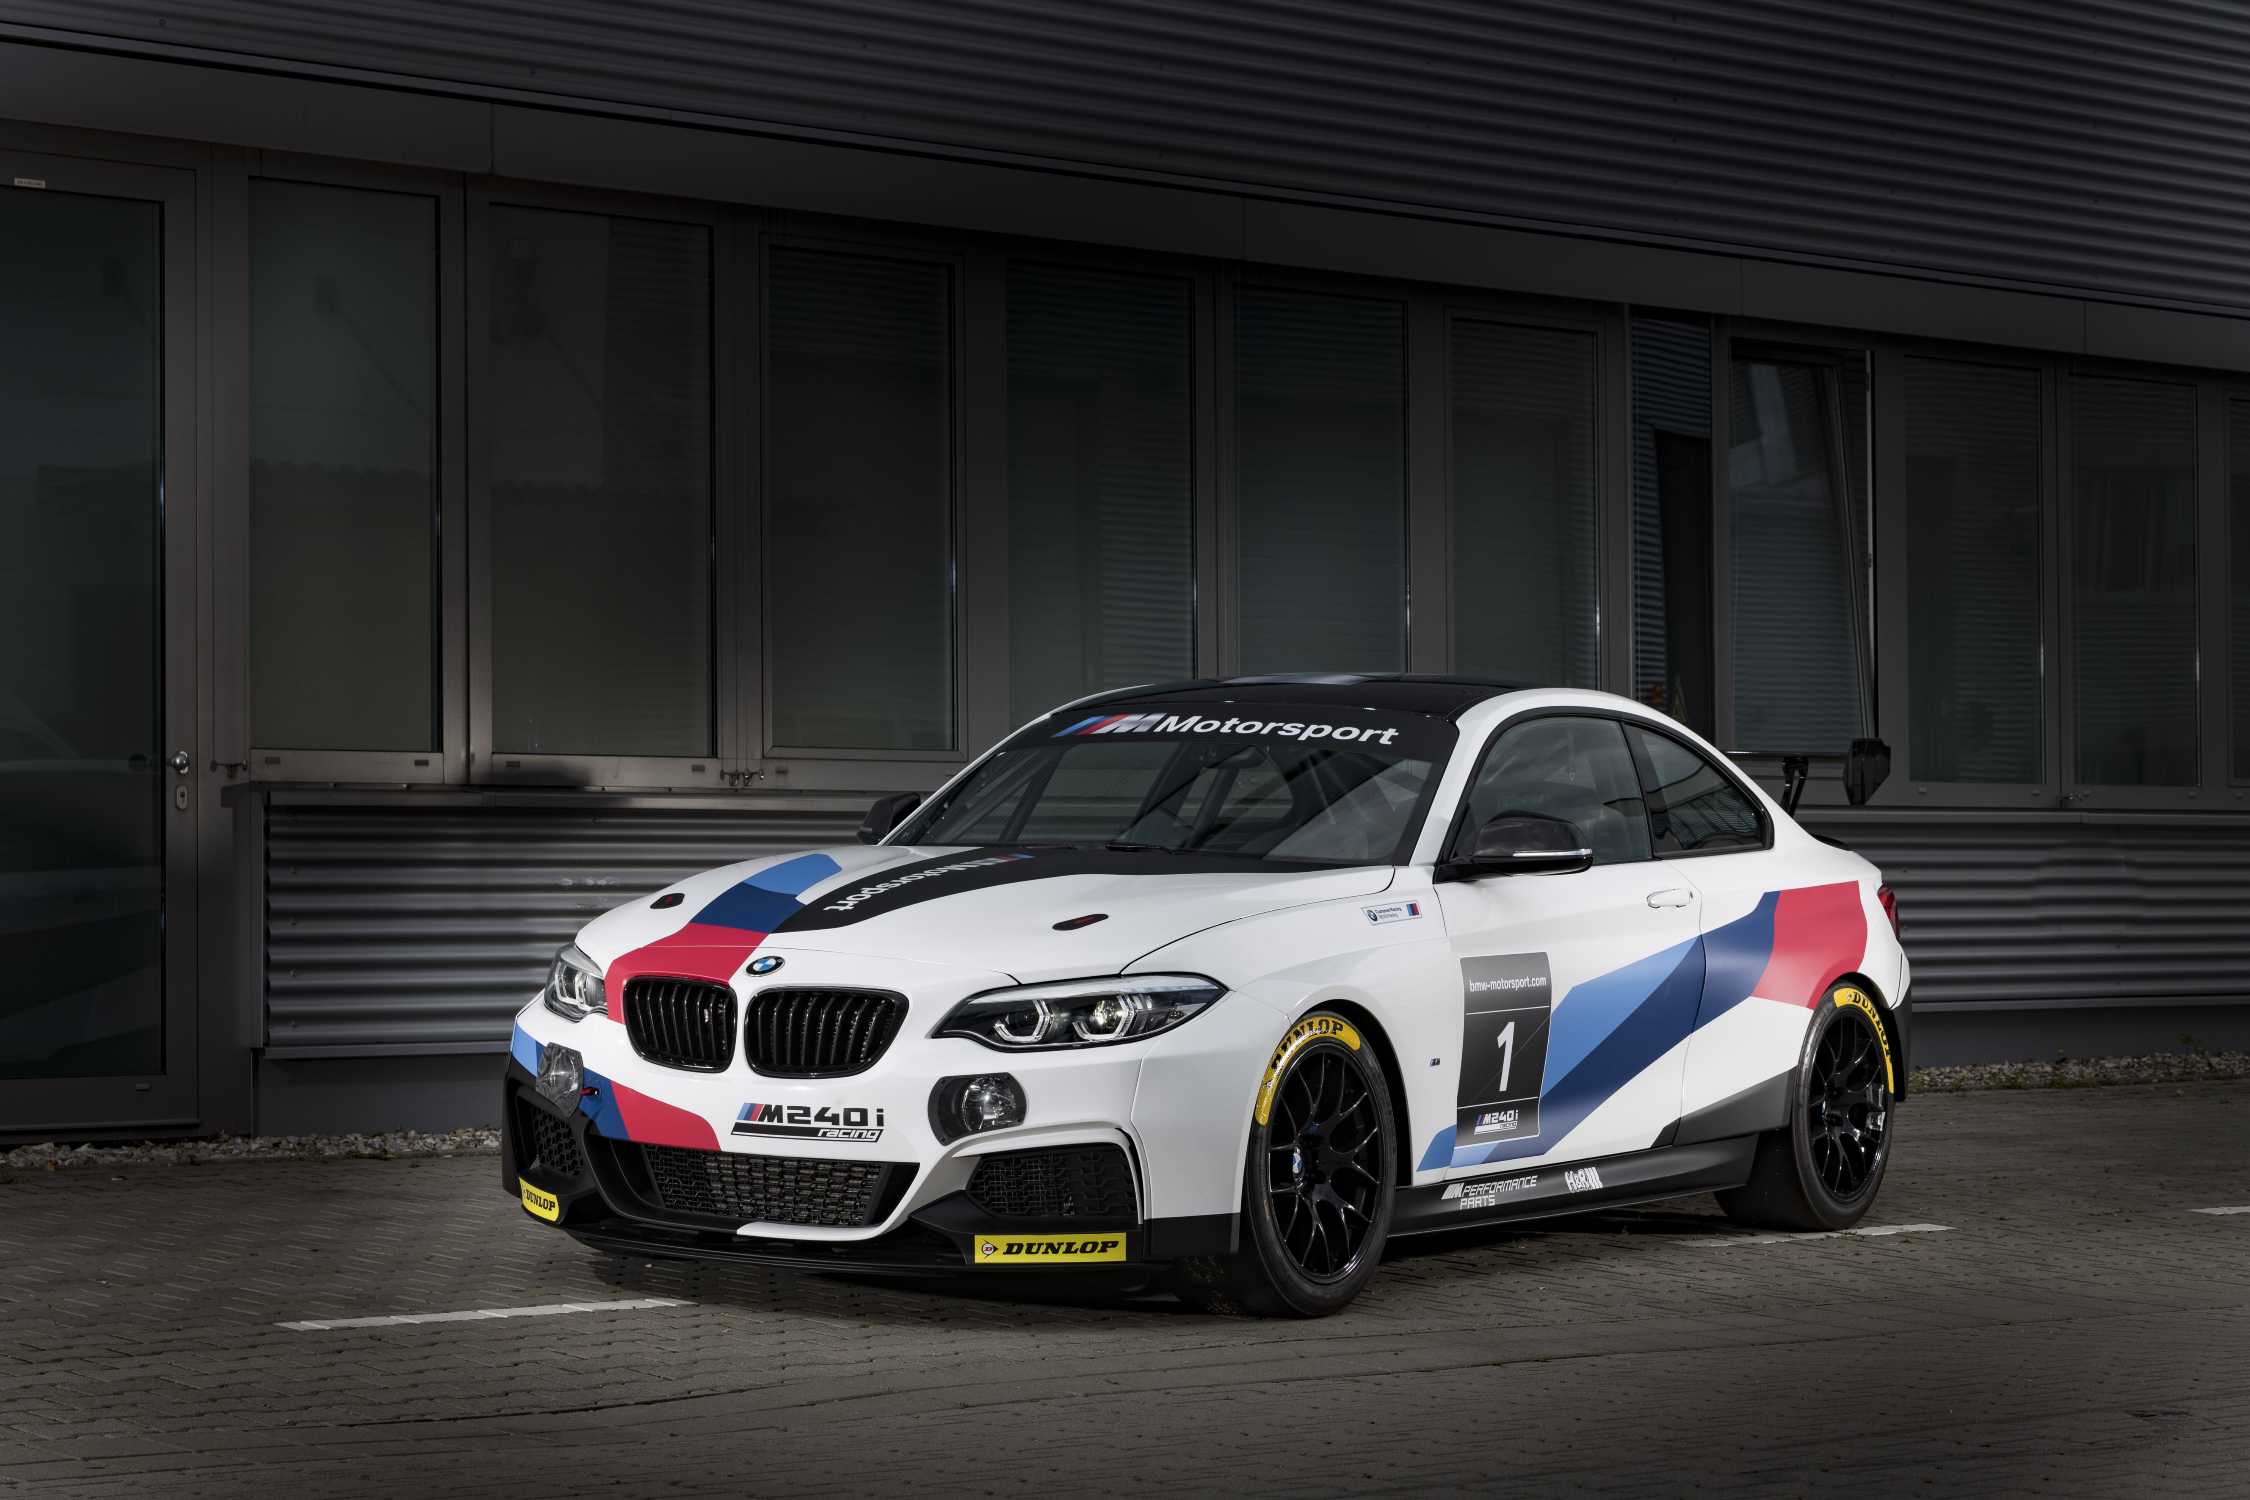 The Bmw M235i Racing Cup Becomes The Bmw M240i Racing Cup Bmw Cup Class To Remain An Integral Part Of The Vln For A Further Two Years